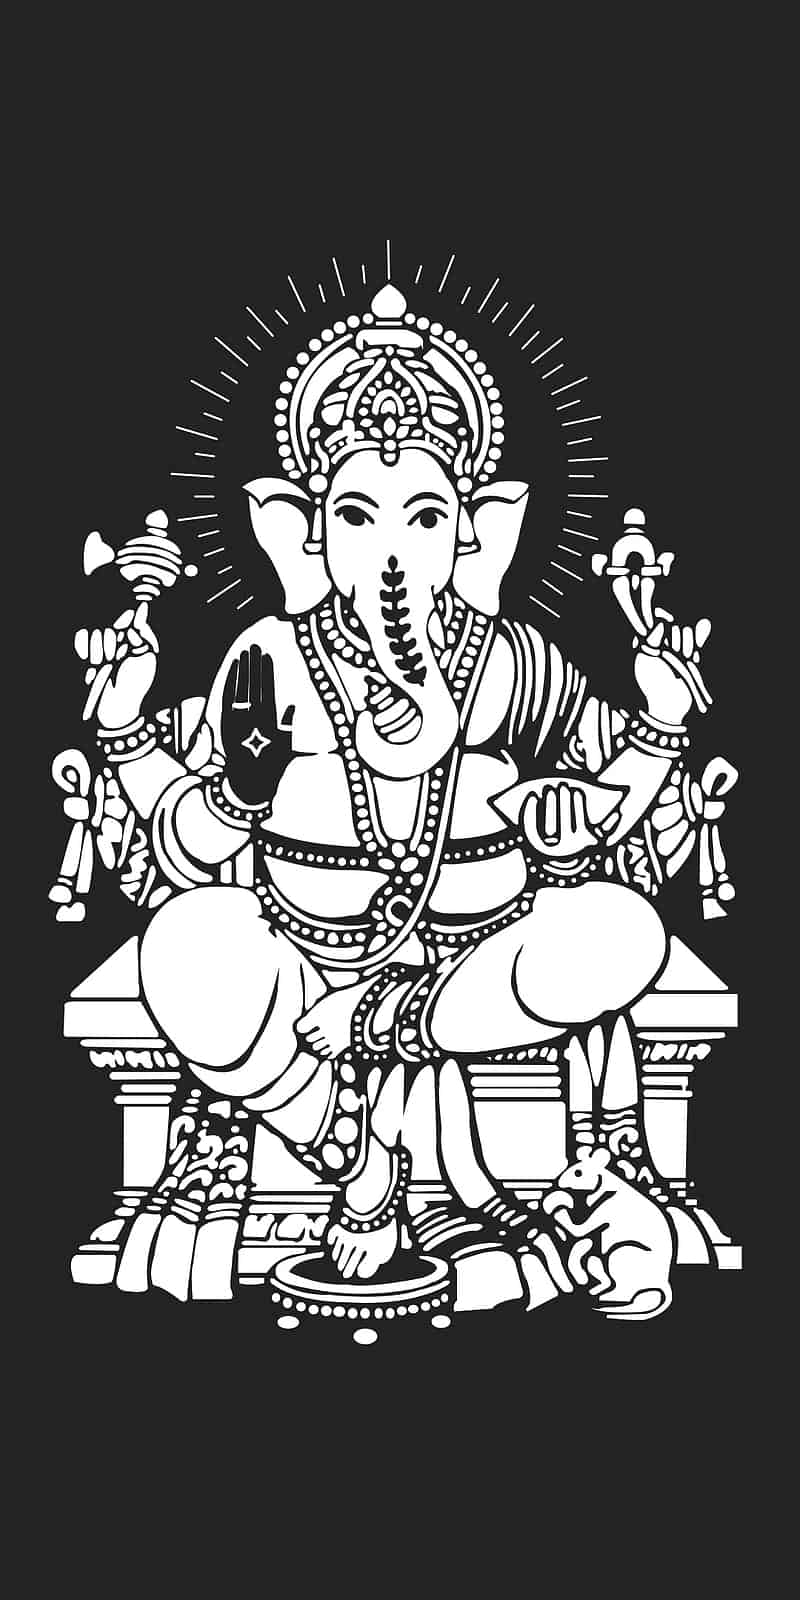 Ganesh Pictures